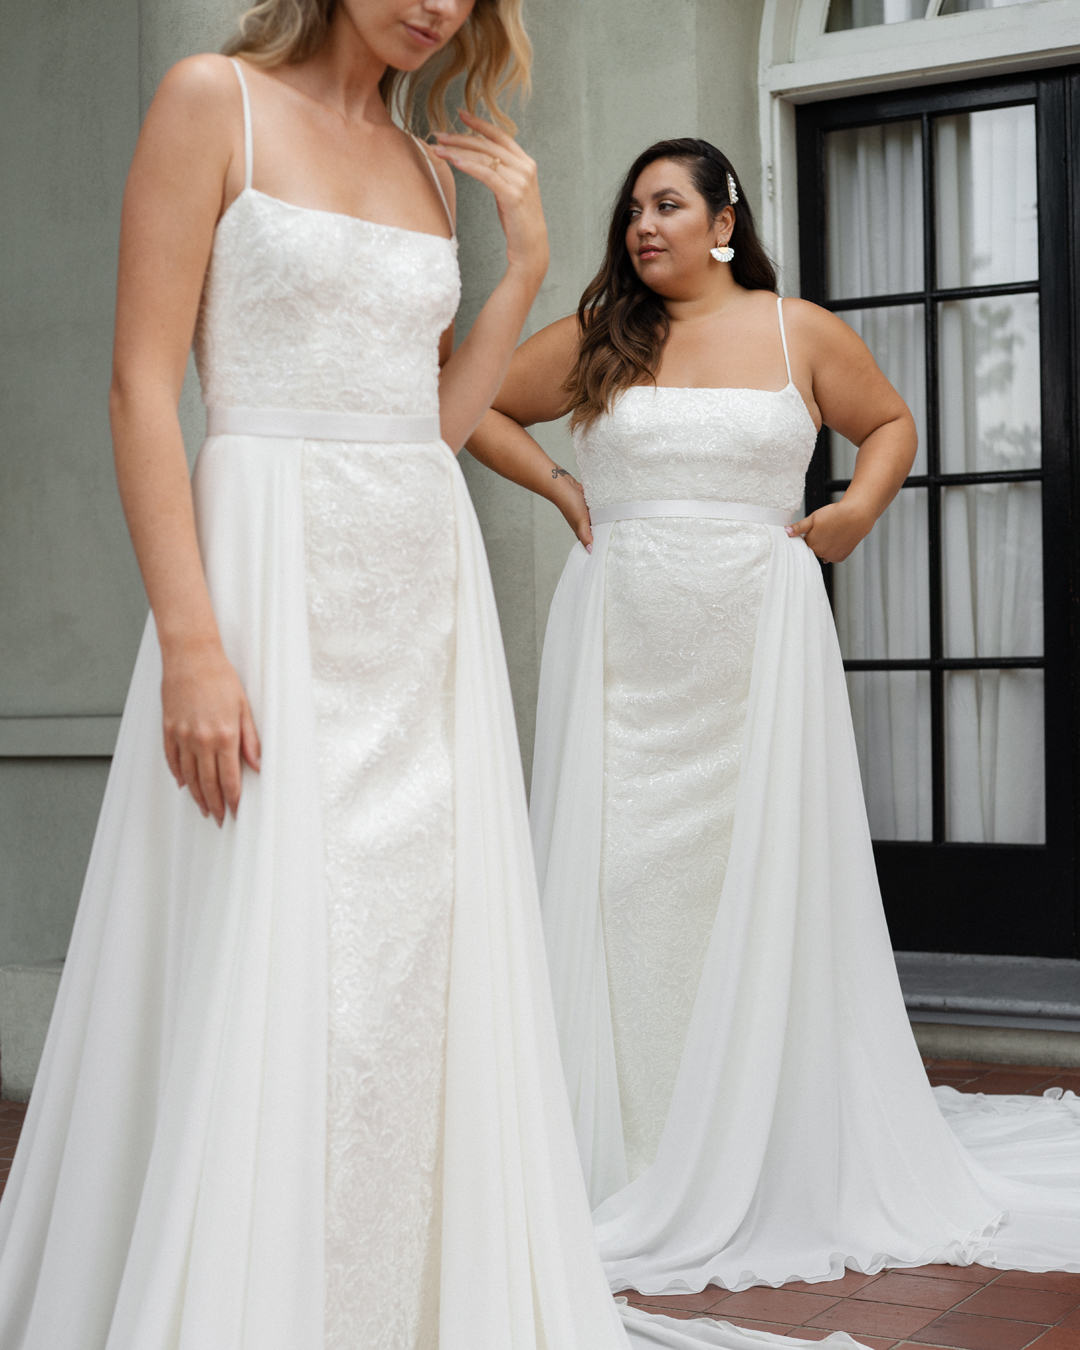 2022 bridal collections from Laudae, Aesling and Truvelle showcase chic silhouettes & size inclusivity | Bridal Gown Design Feature on Brontë Bride